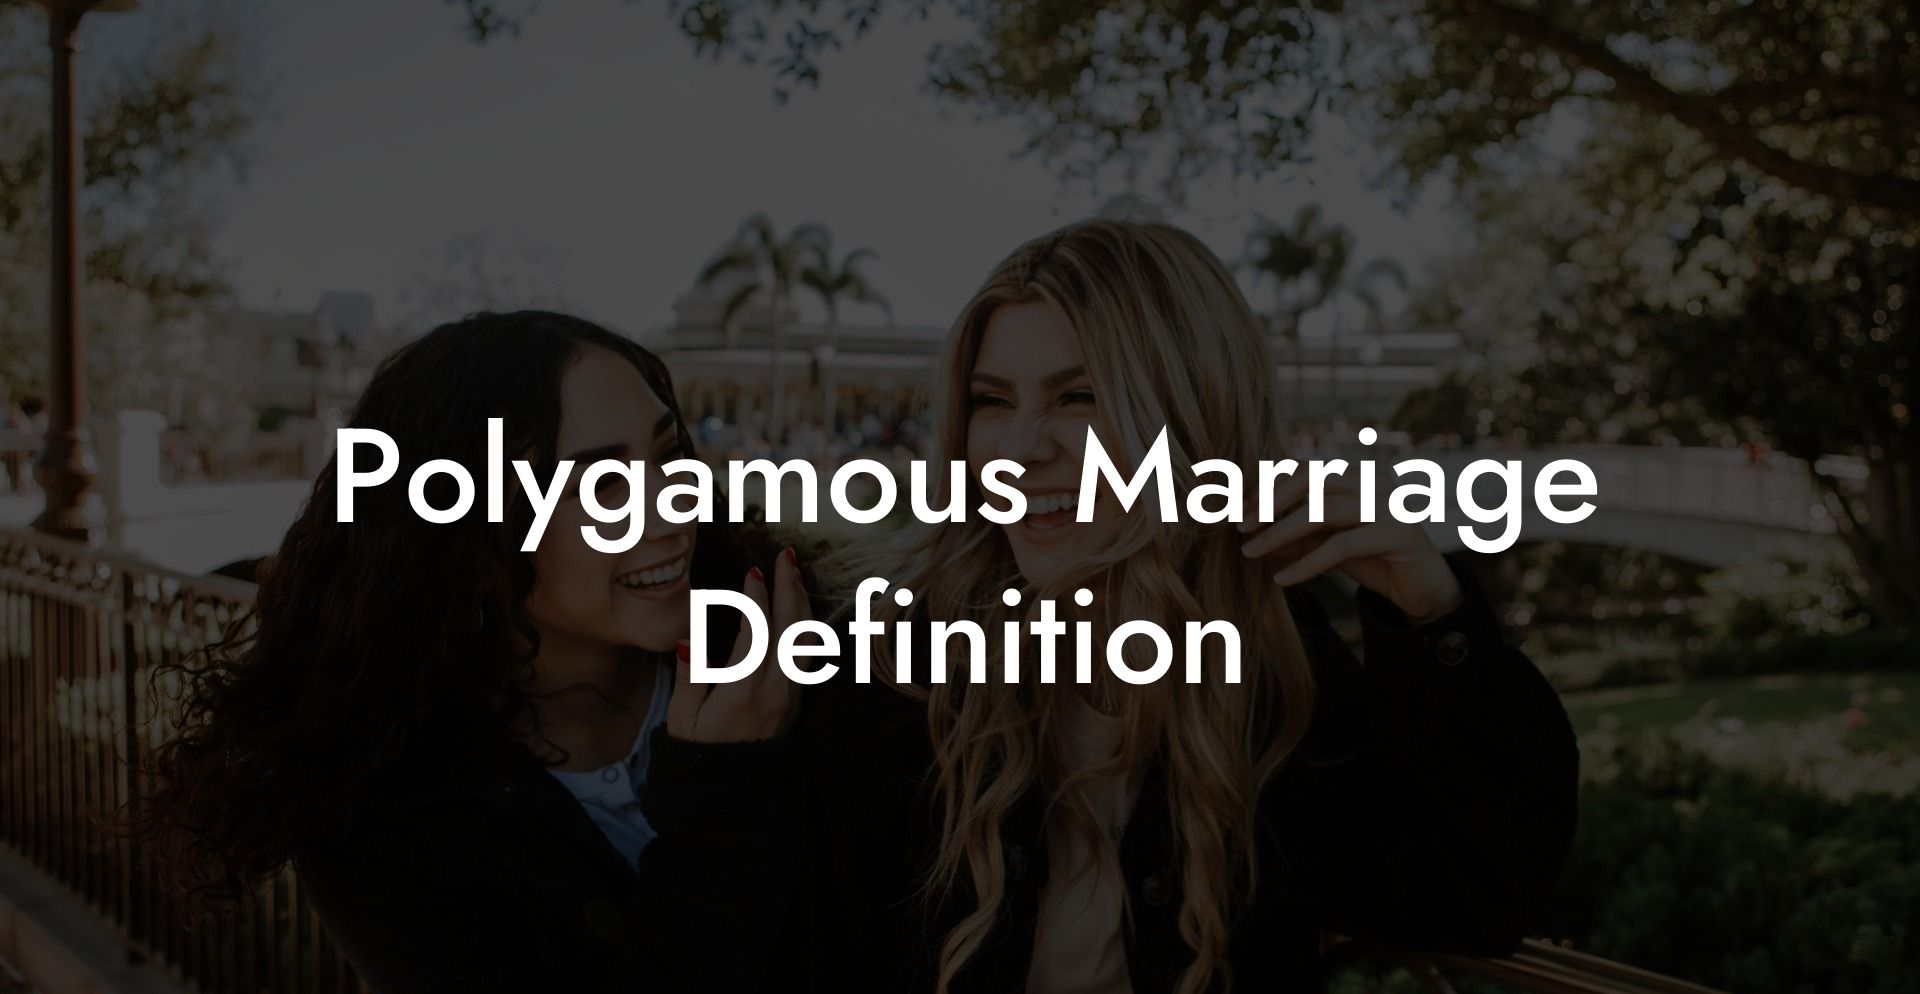 Polygamous Marriage Definition